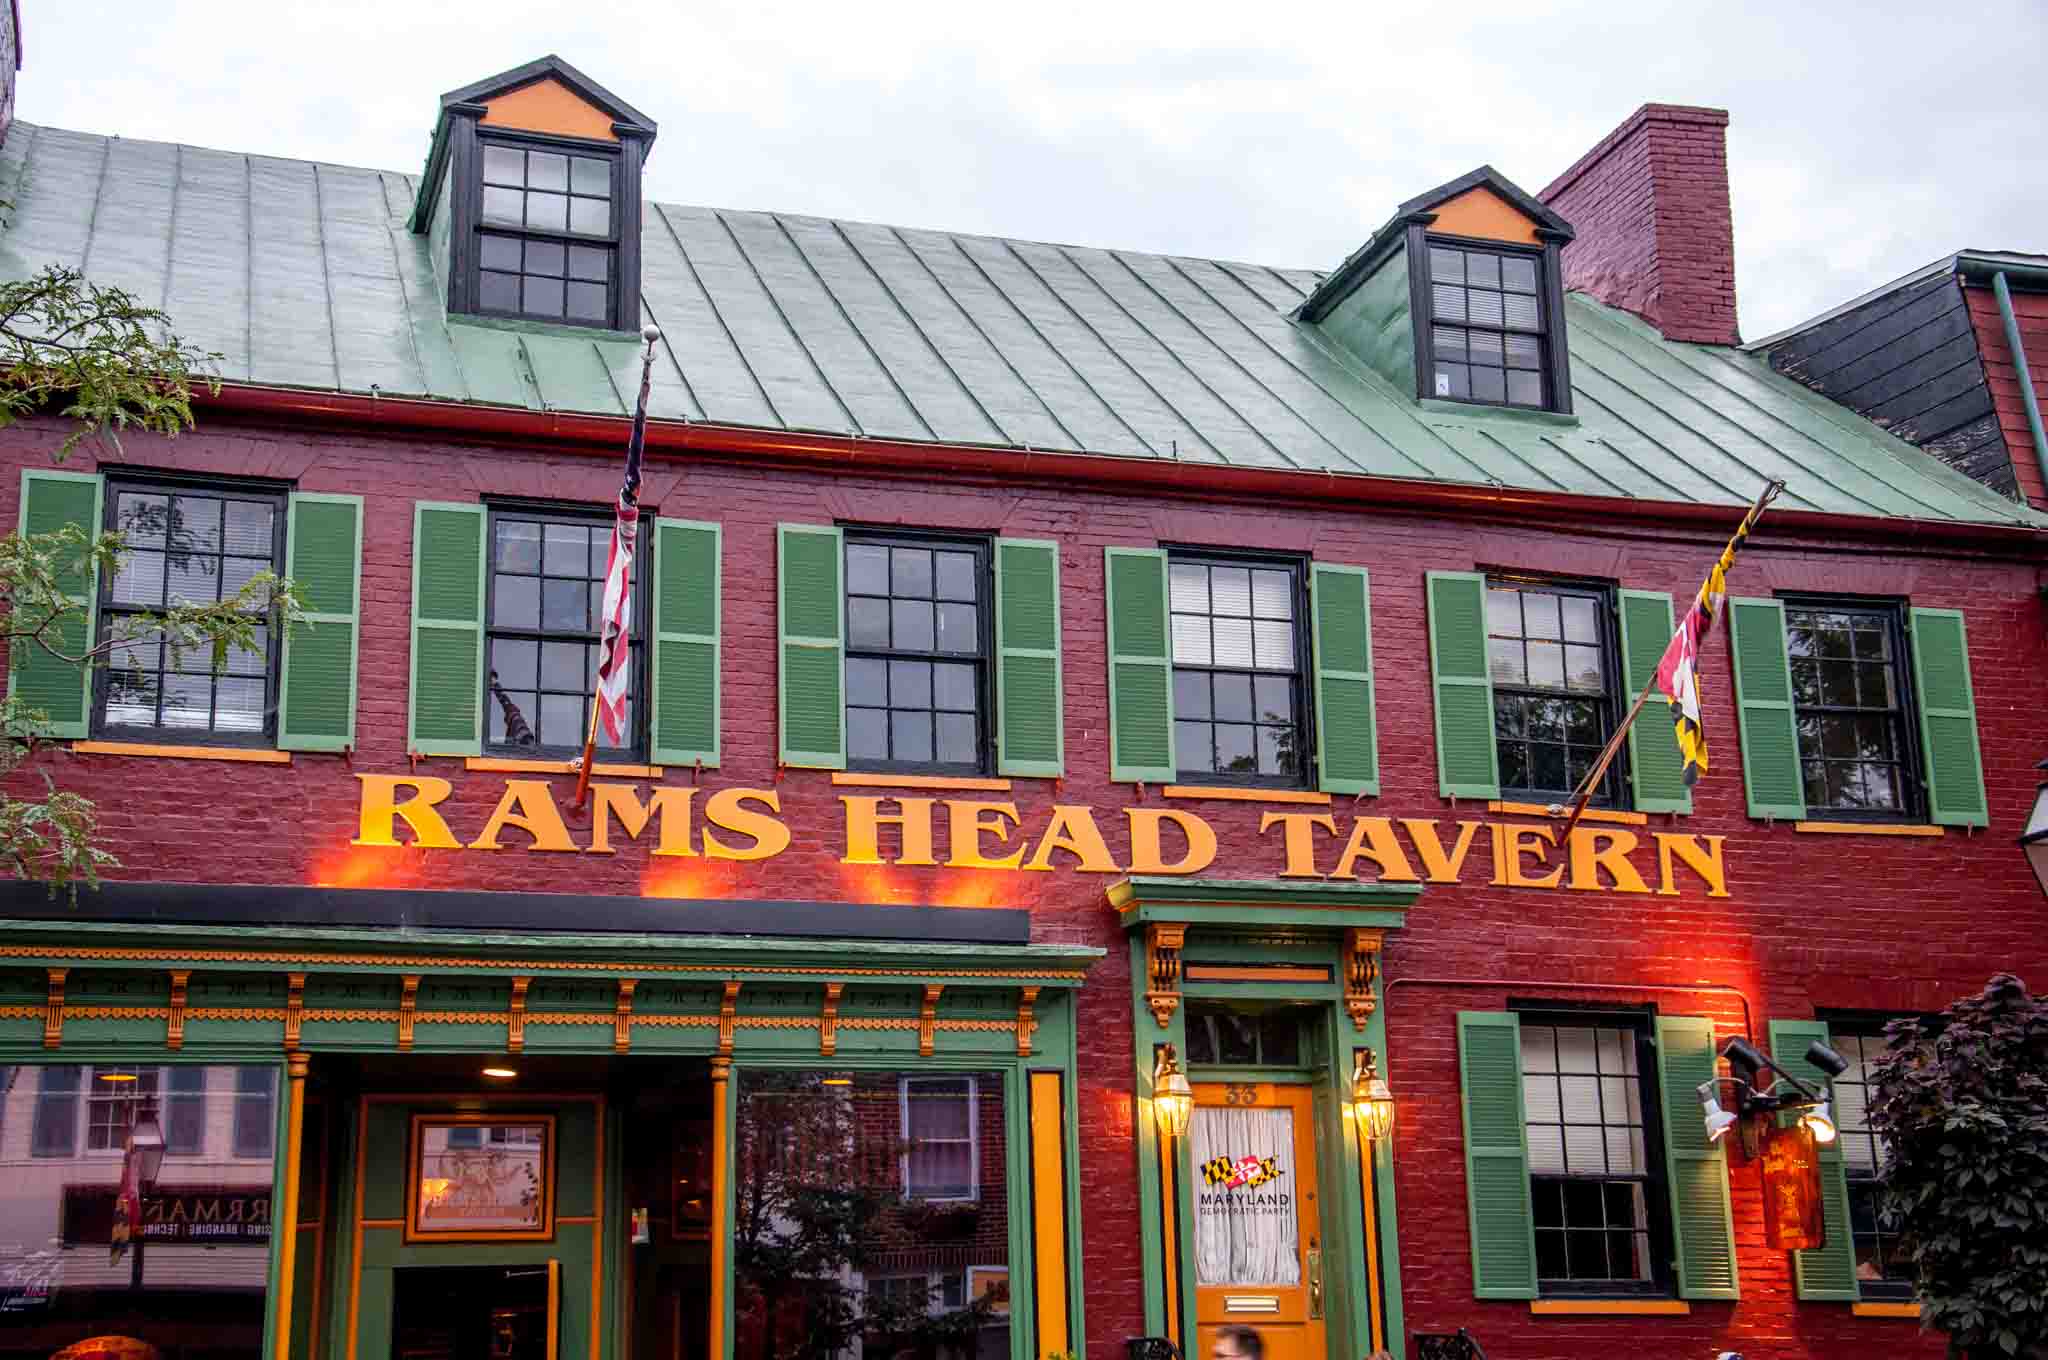 Painted red brick exterior of Rams Head Tavern.